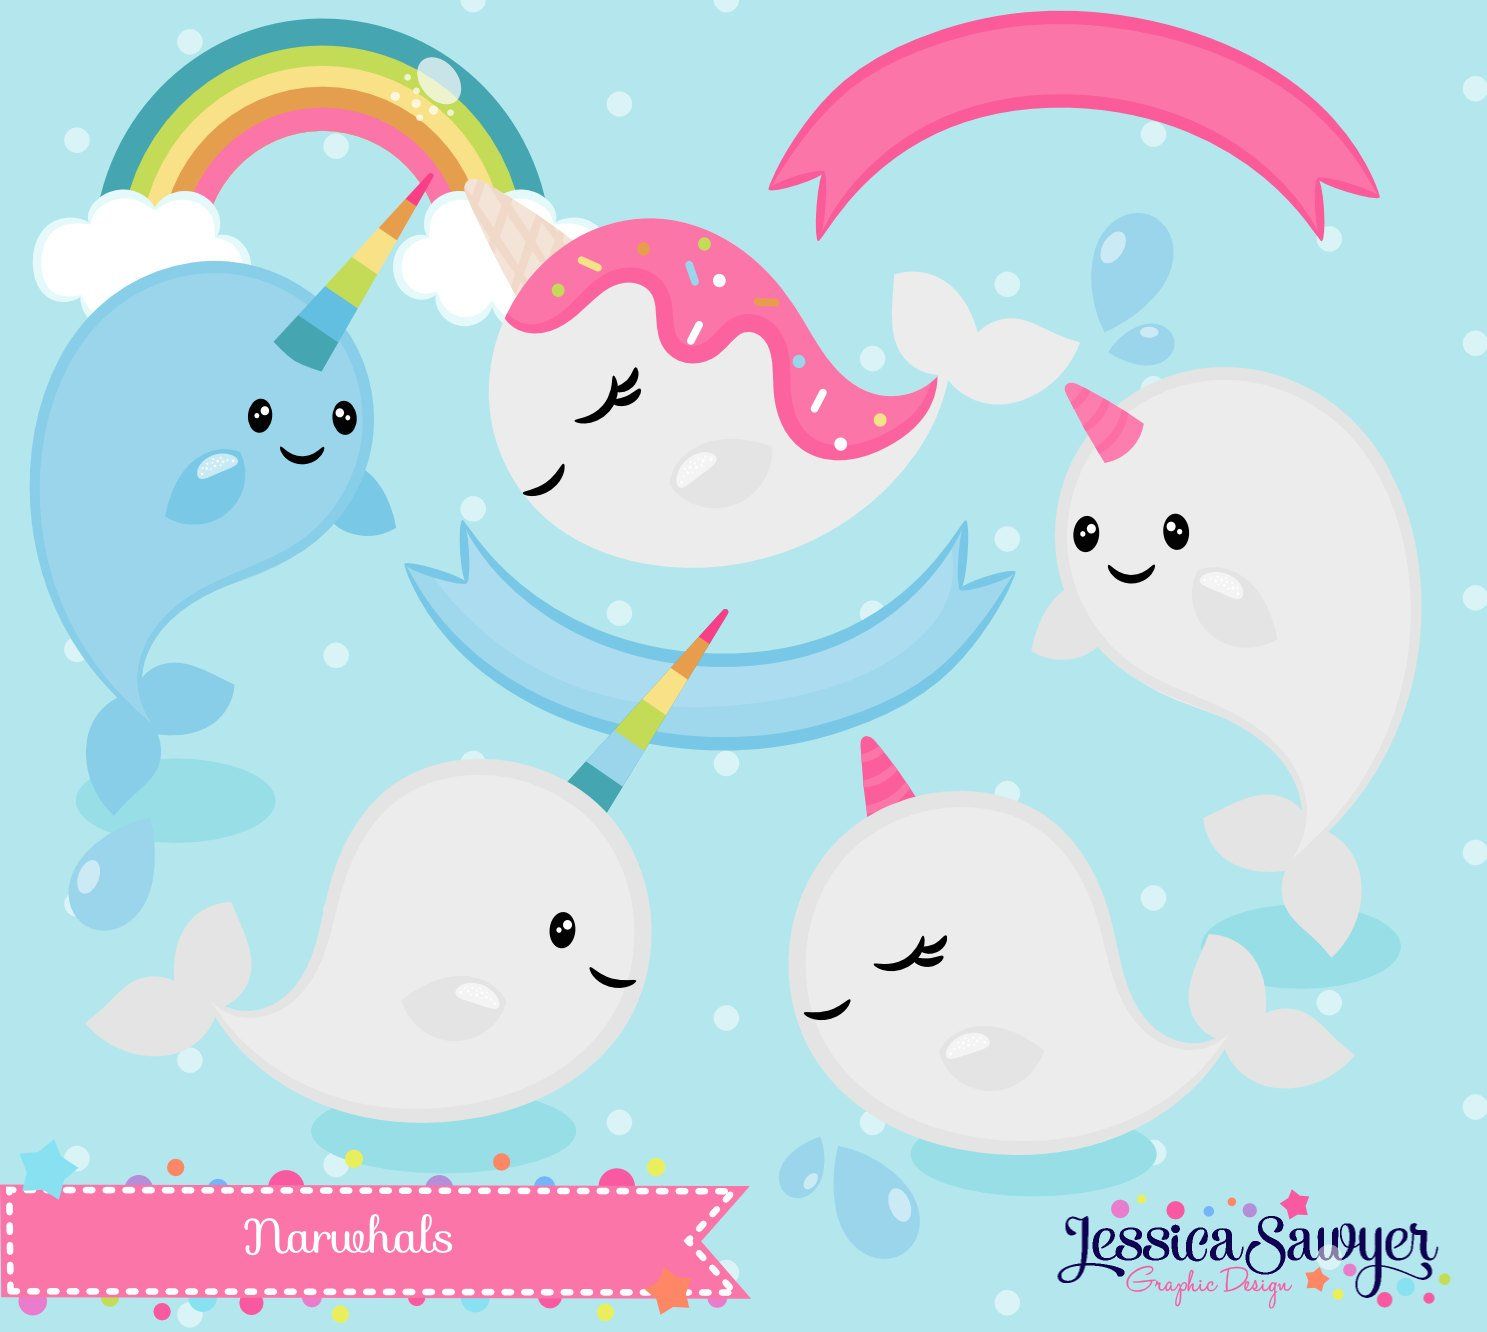 Instant download narwhal.